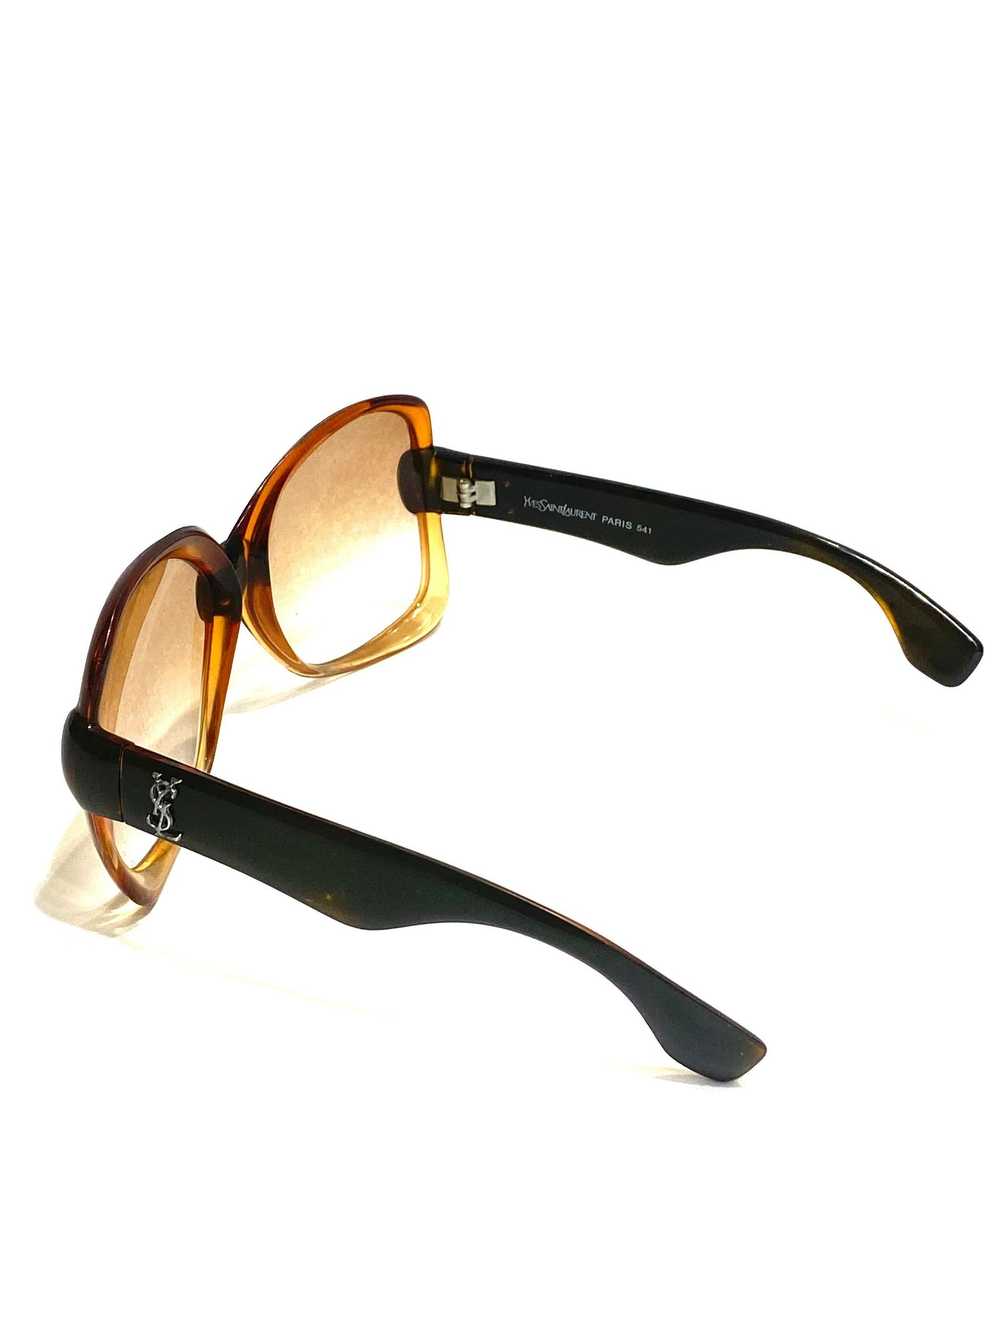 Vintage YSL Brown and Black Square Sunglasses - image 3